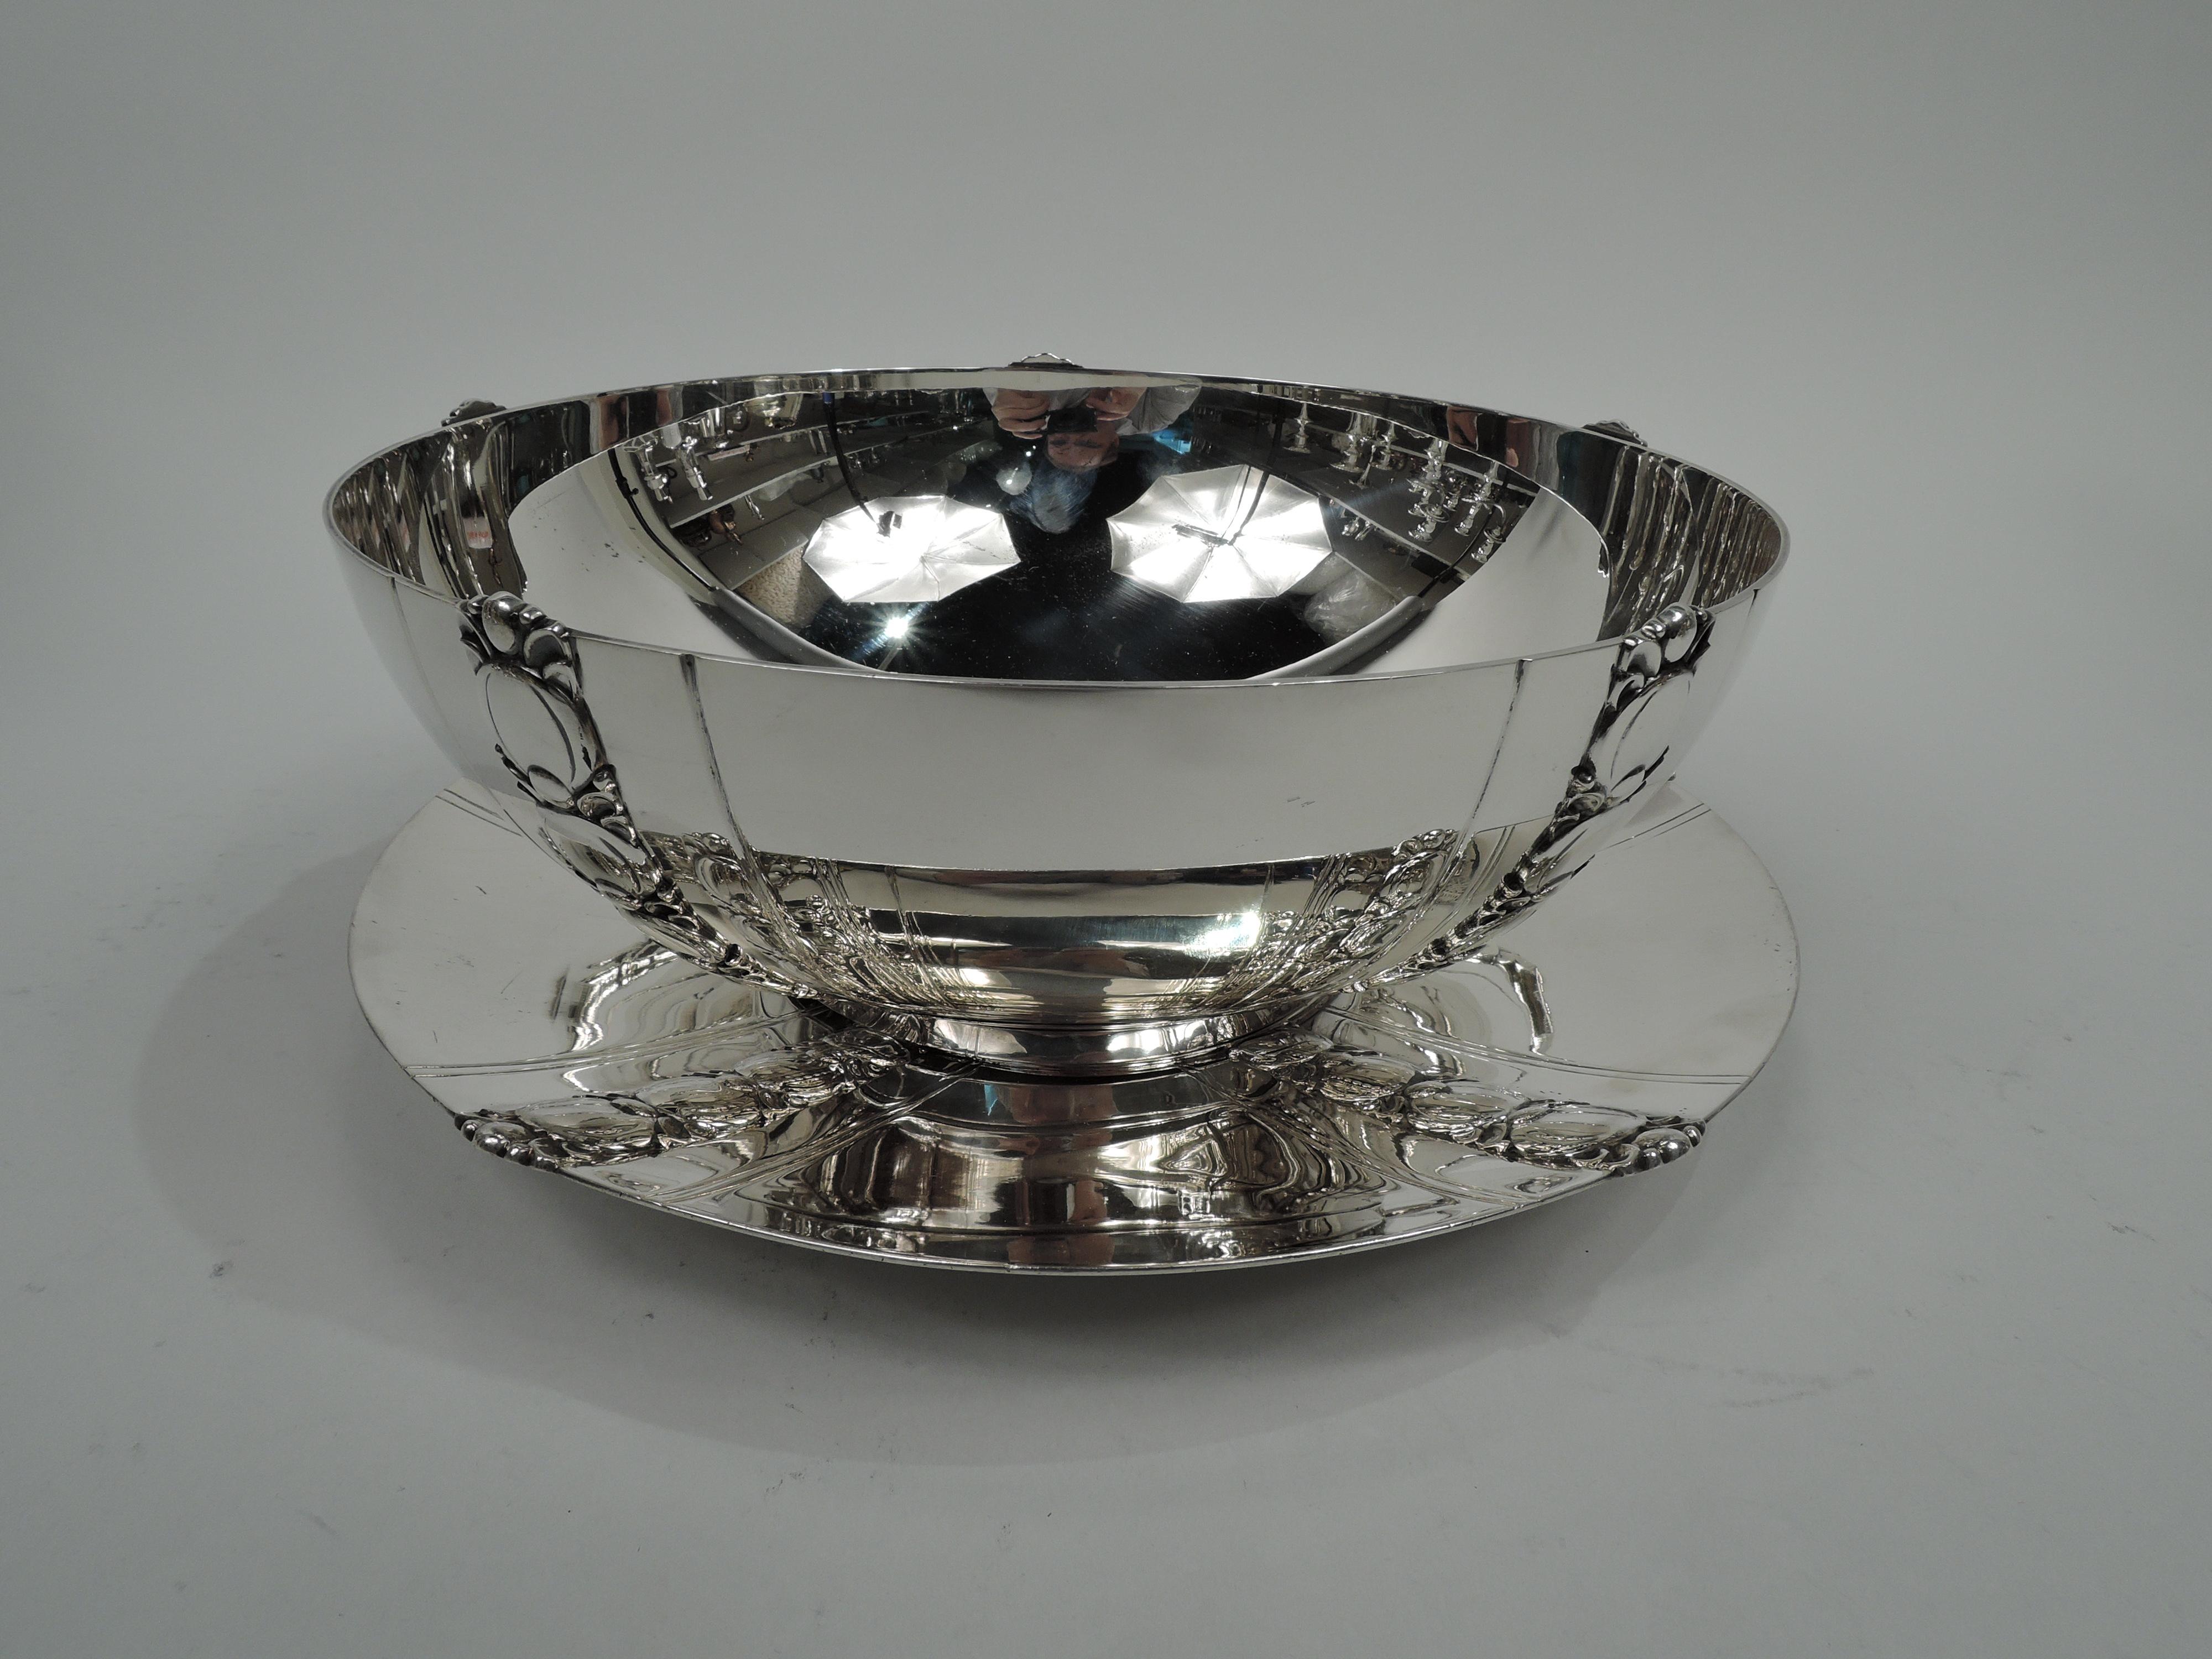 Art Deco sterling silver serving bowl on stand. Made by Tiffany & Co. in New York. Bowl: Curved sides and short and straight foot ring. Vertical pilasters comprising graduated and stylized tomatoes applied to bowl exterior between incised bands.